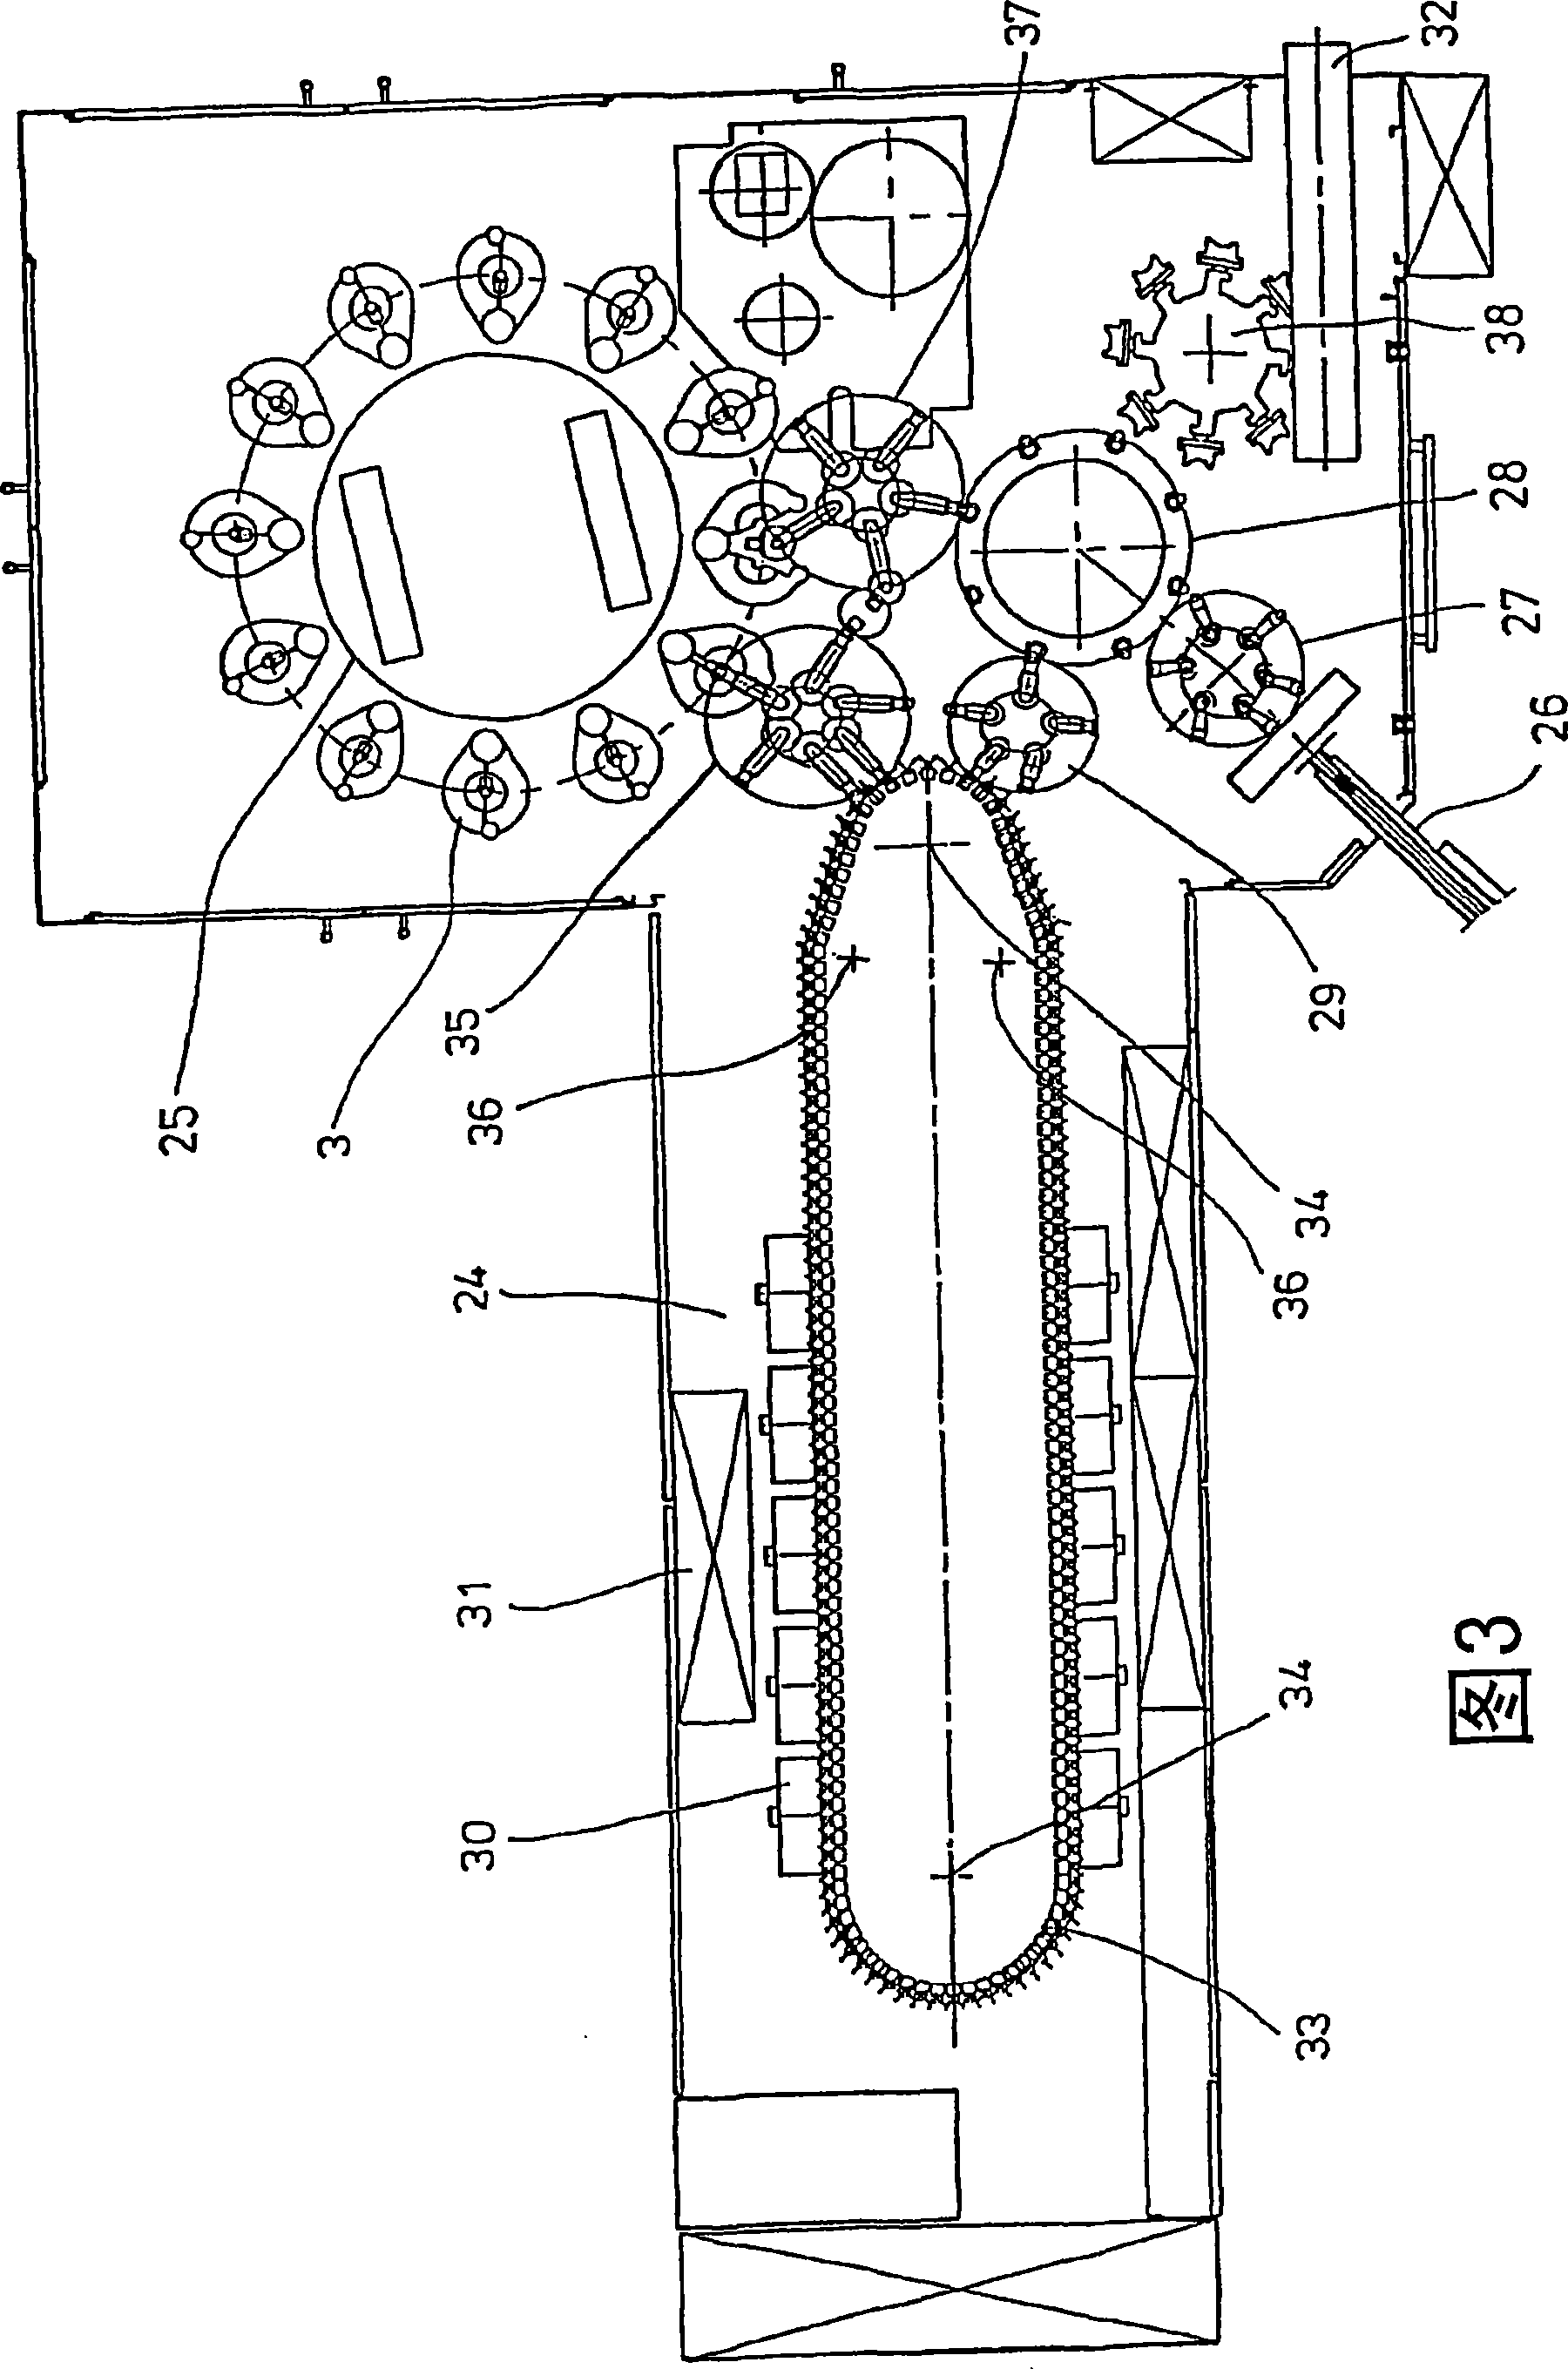 Apparatus for blow moulding containers, comprising transport elements with two gripper arms